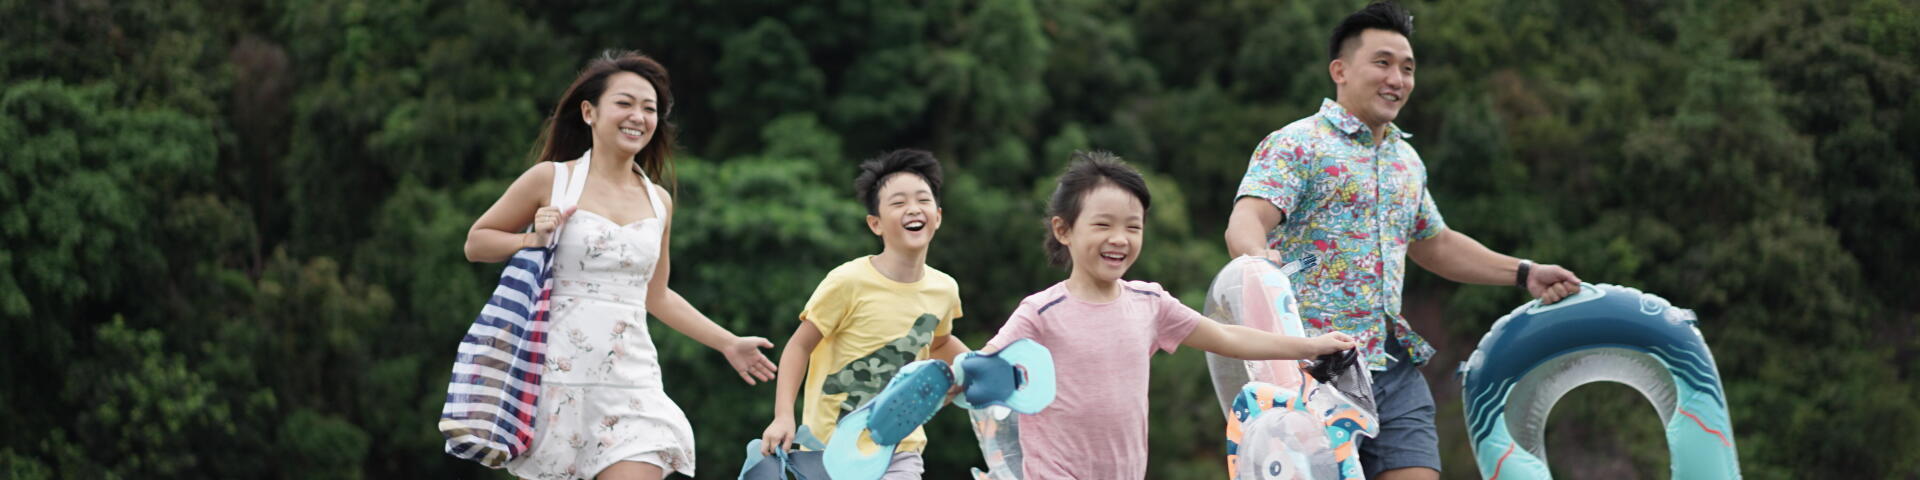 Fun Family Activities to Keep Active this June Holiday